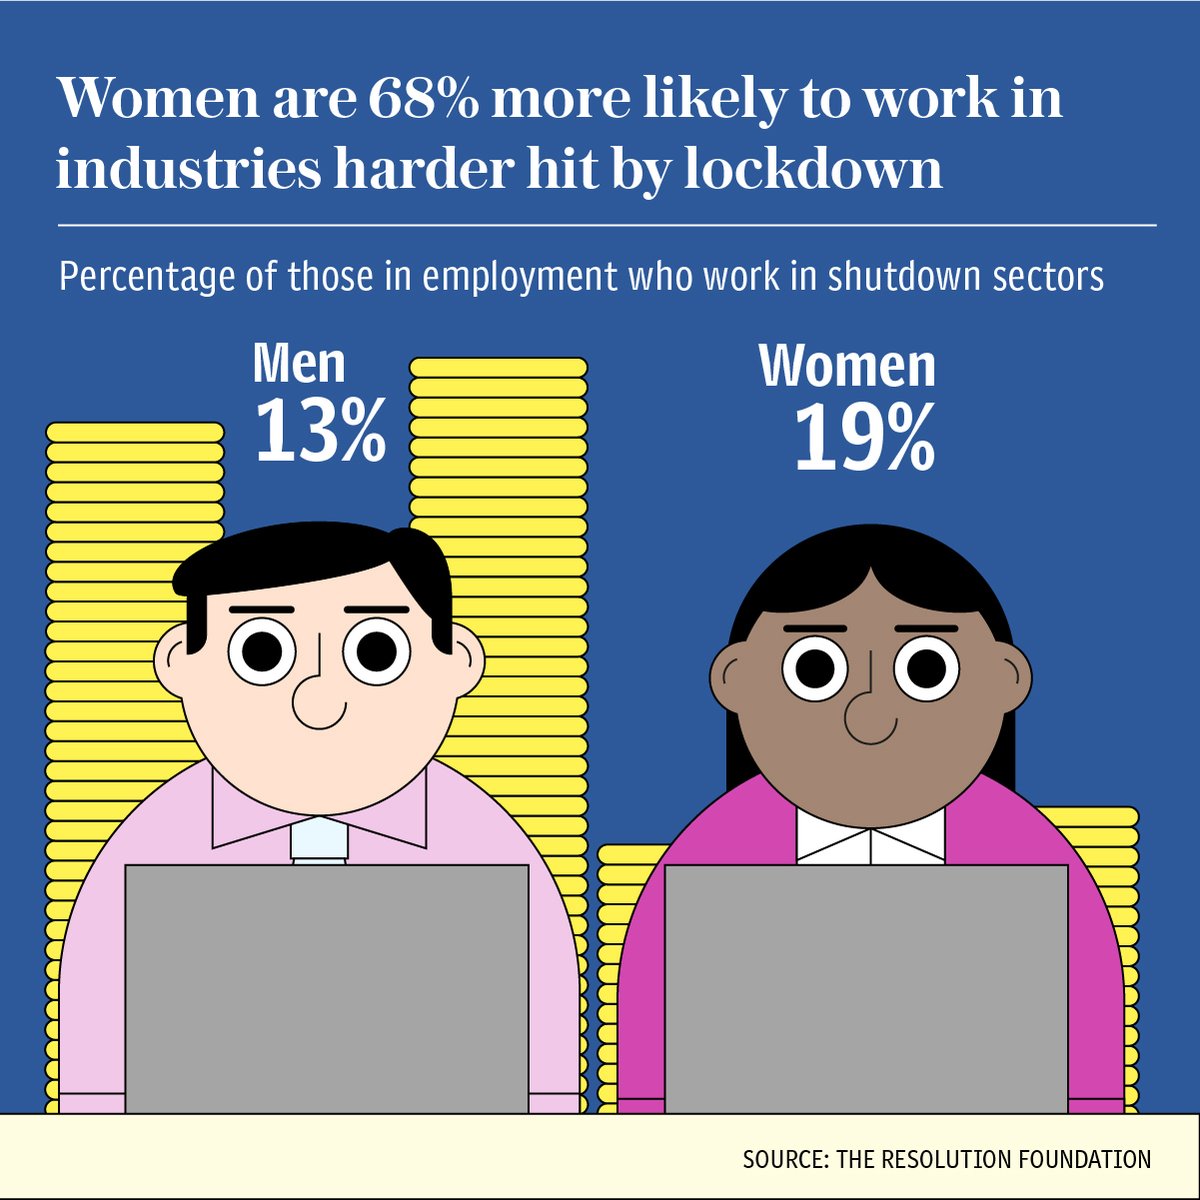 Women are also more likely to work in sectors that have had to shut down during lockdown, research by think-tank the Resolution Foundation ( @resfoundation) has shown.